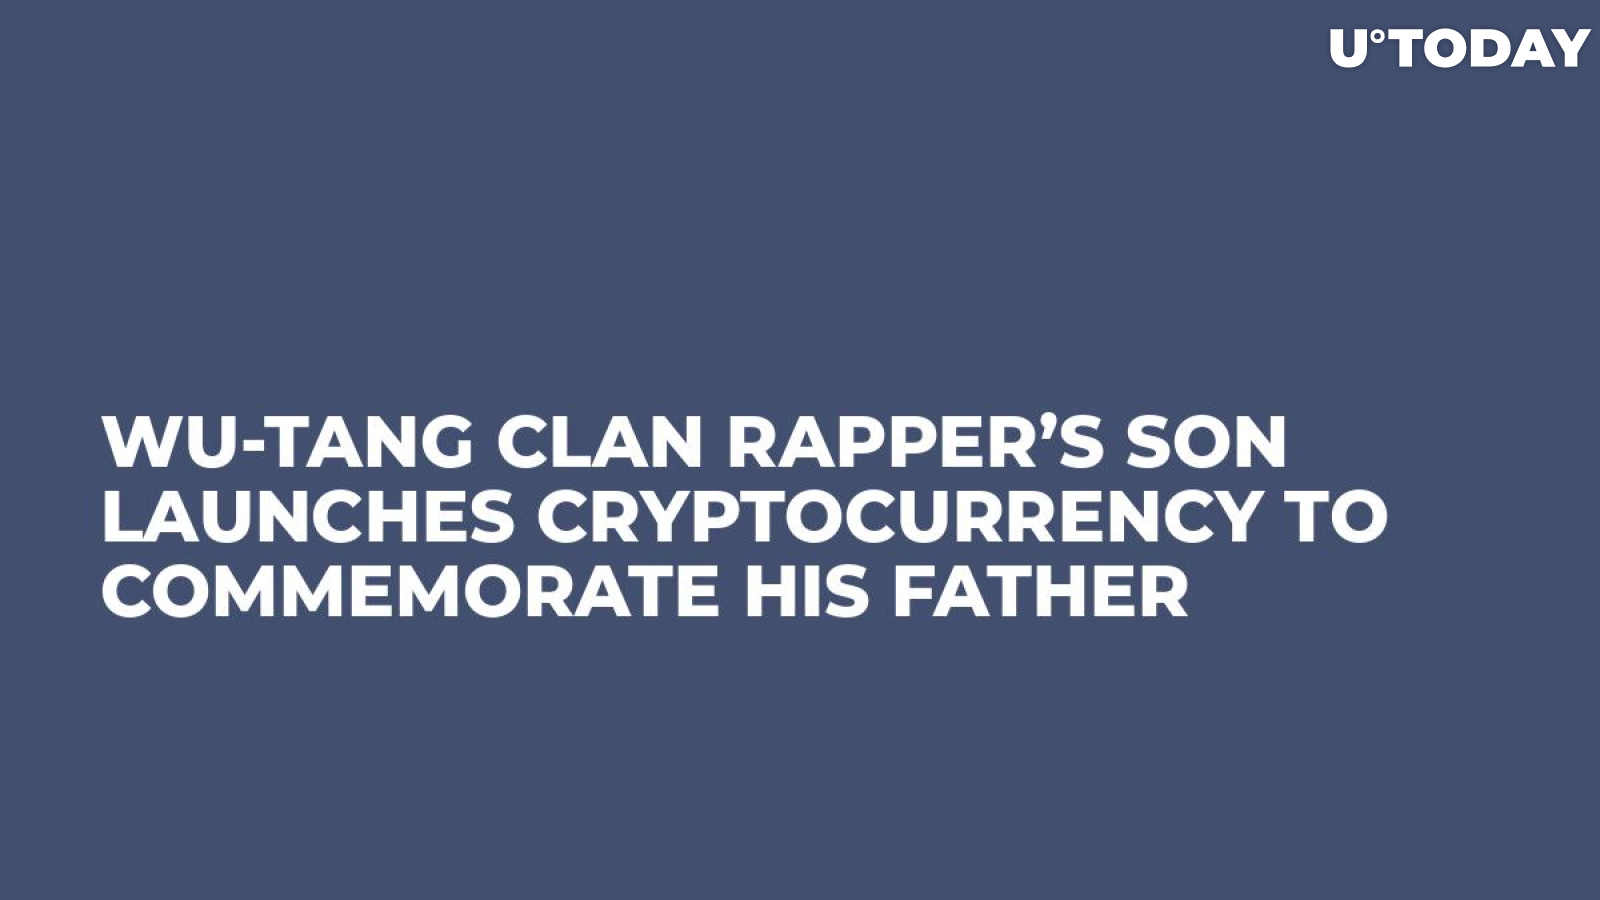 Wu-Tang Clan Rapper’s Son Launches Cryptocurrency to Commemorate His Father